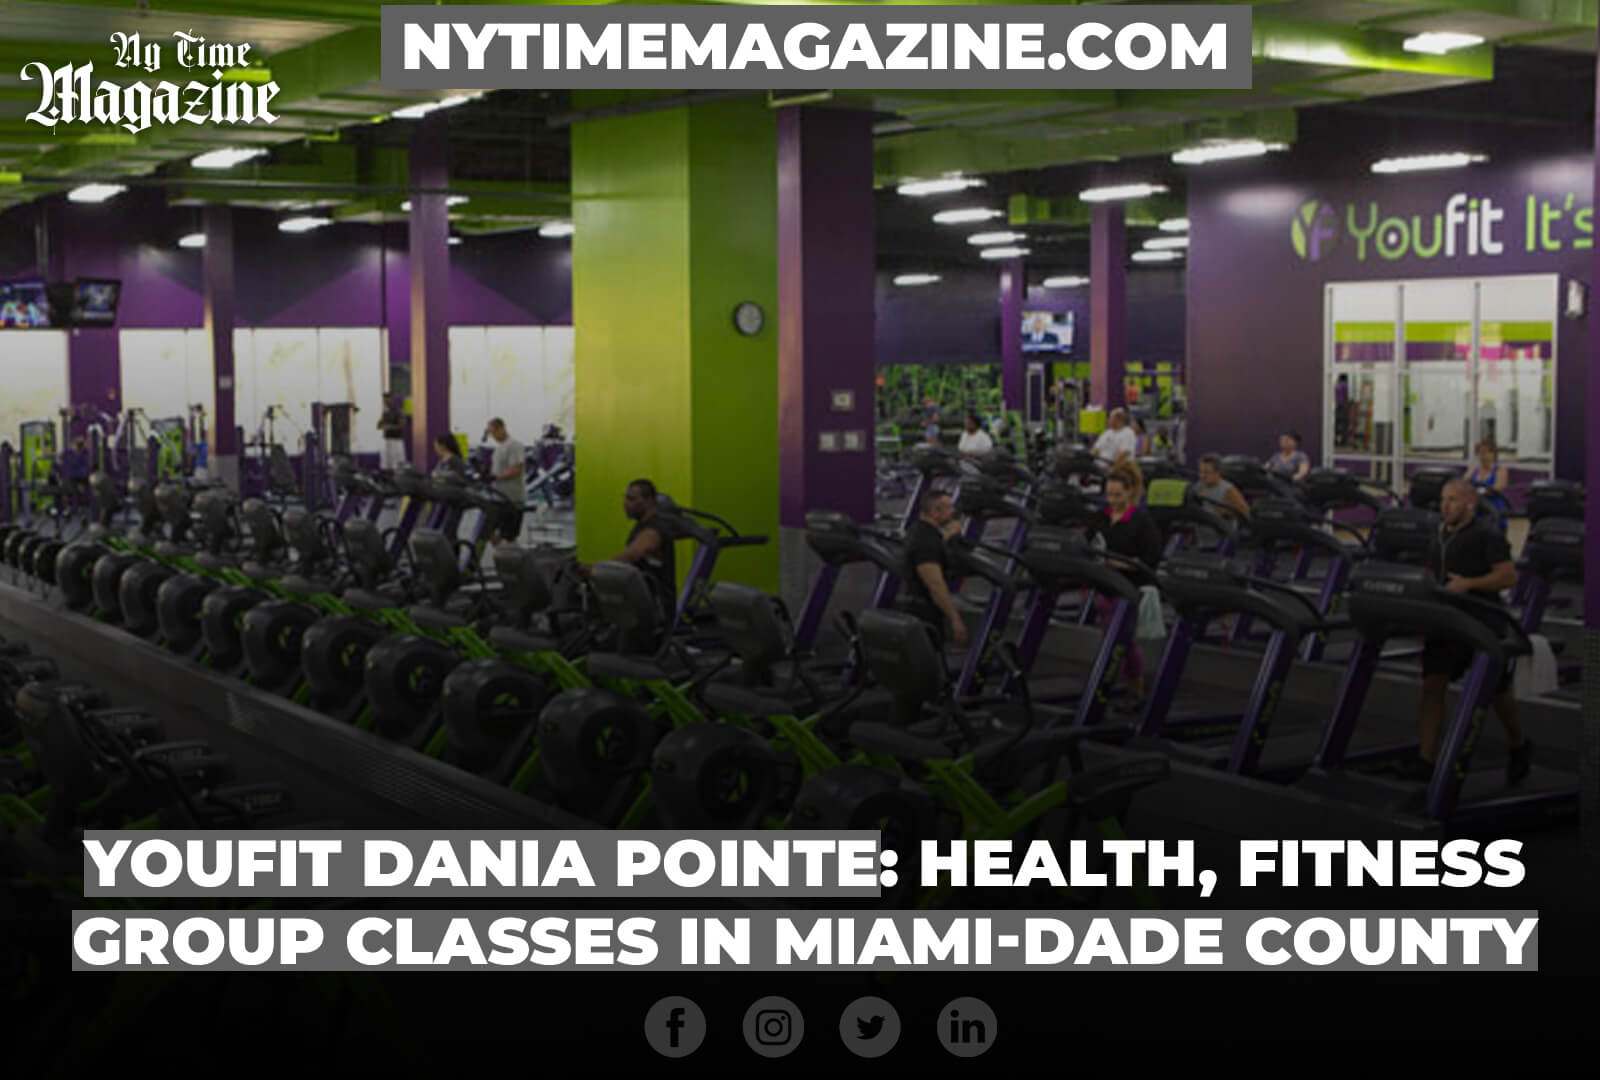 Youfit Dania Pointe: Health, Fitness & Group Classes in Miami-Dade County